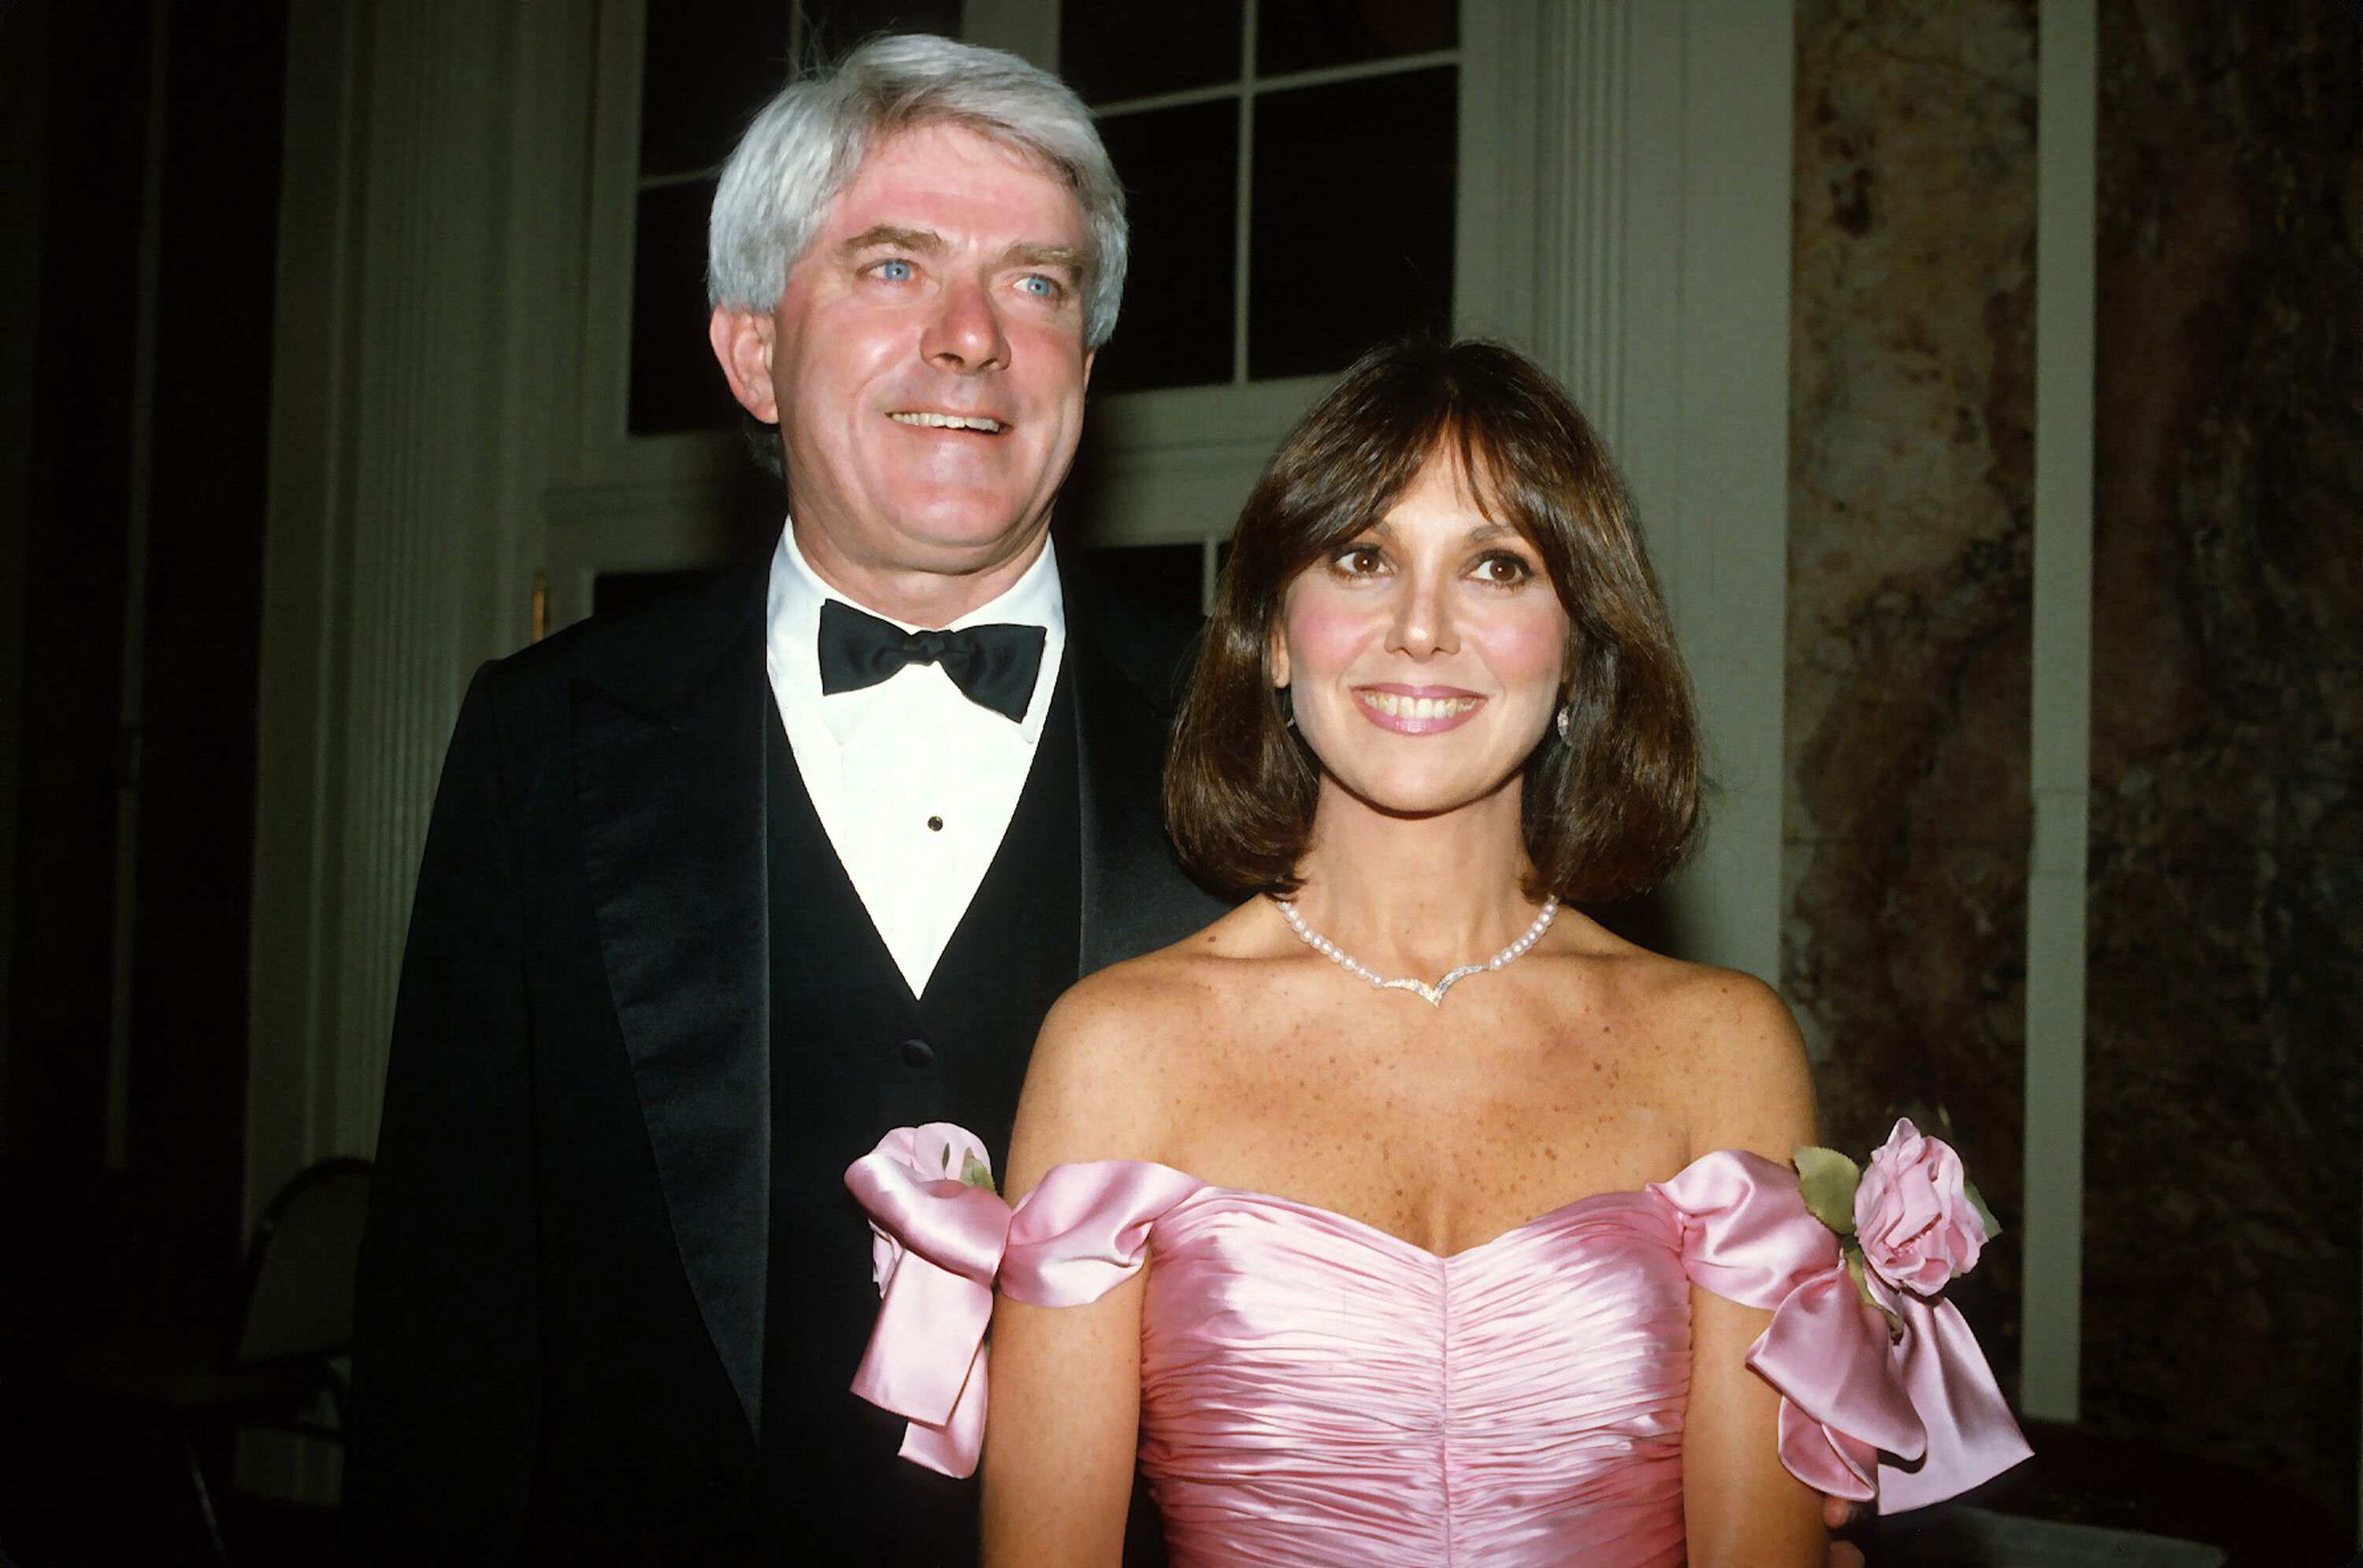 Marlo Thomas of 'That Girl' Fame Has Been Married to Phil Donahue for